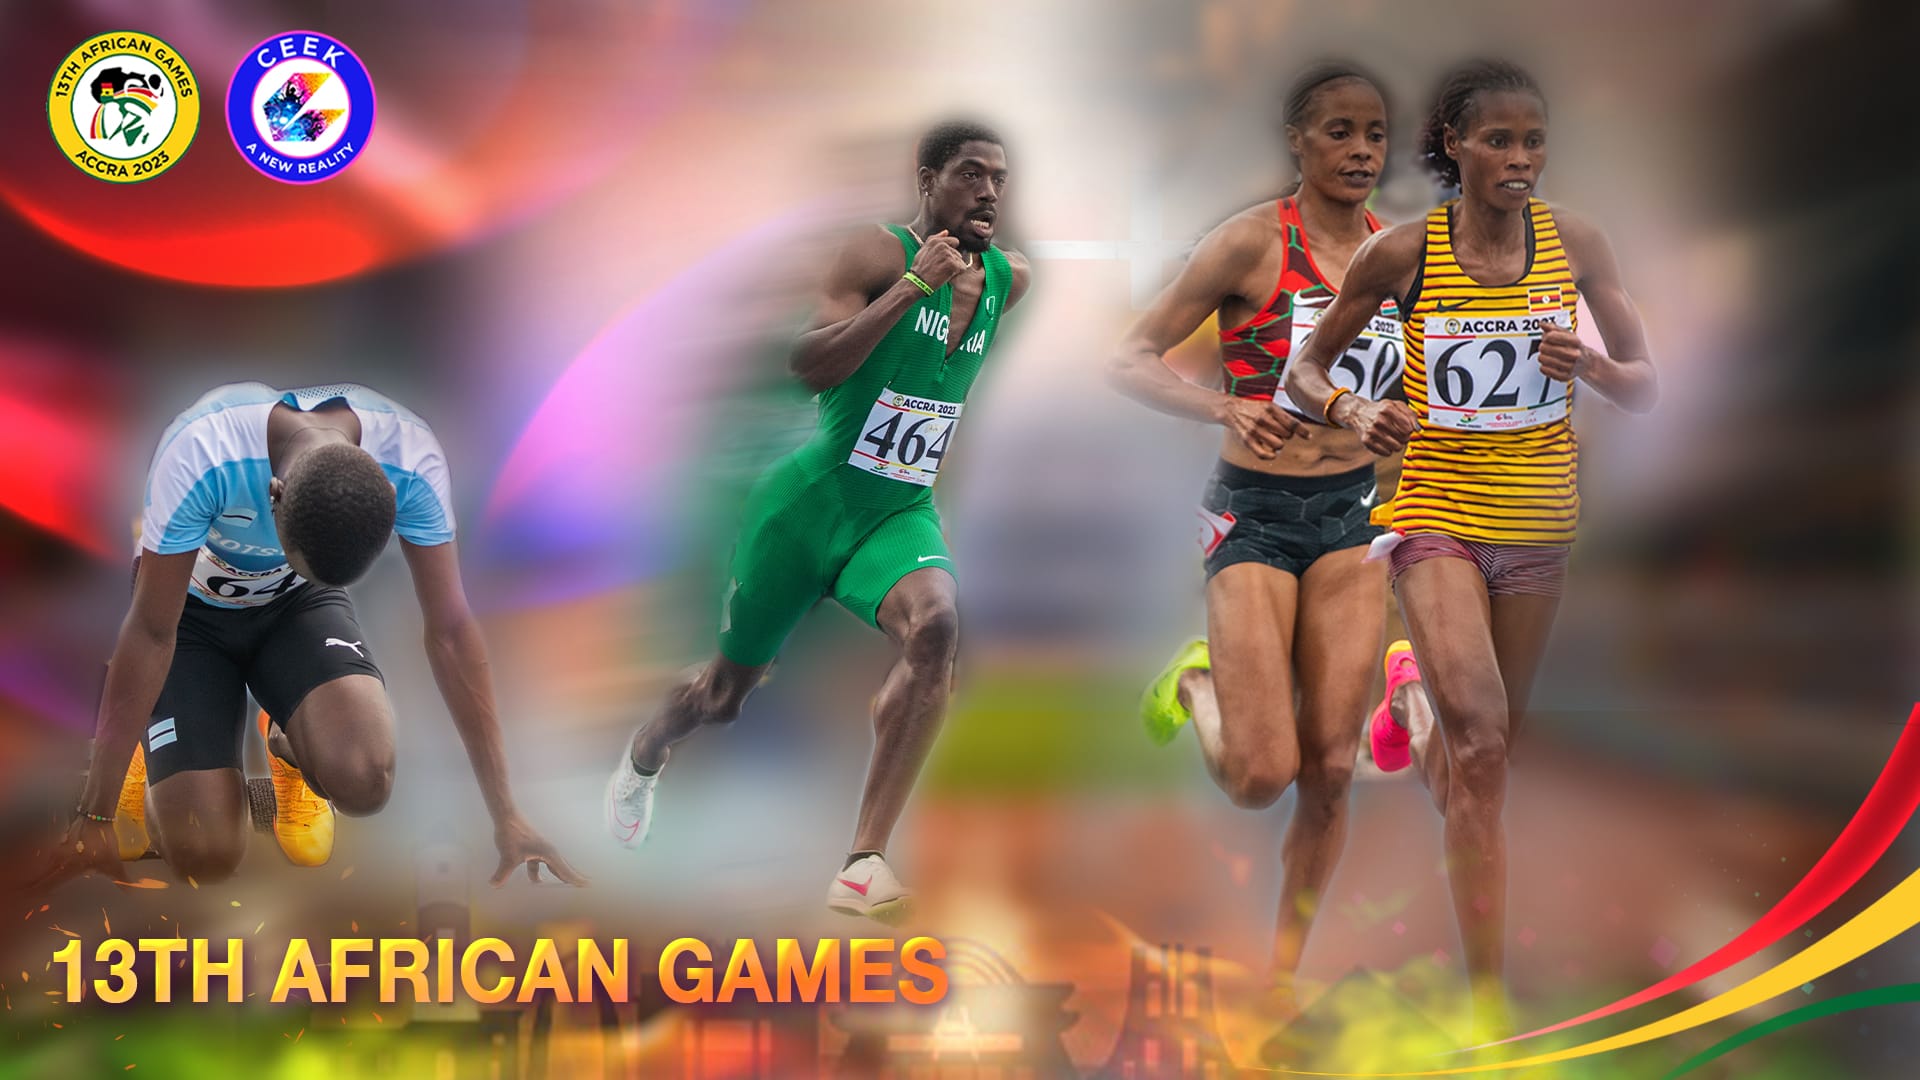 Accra African Games 18th March